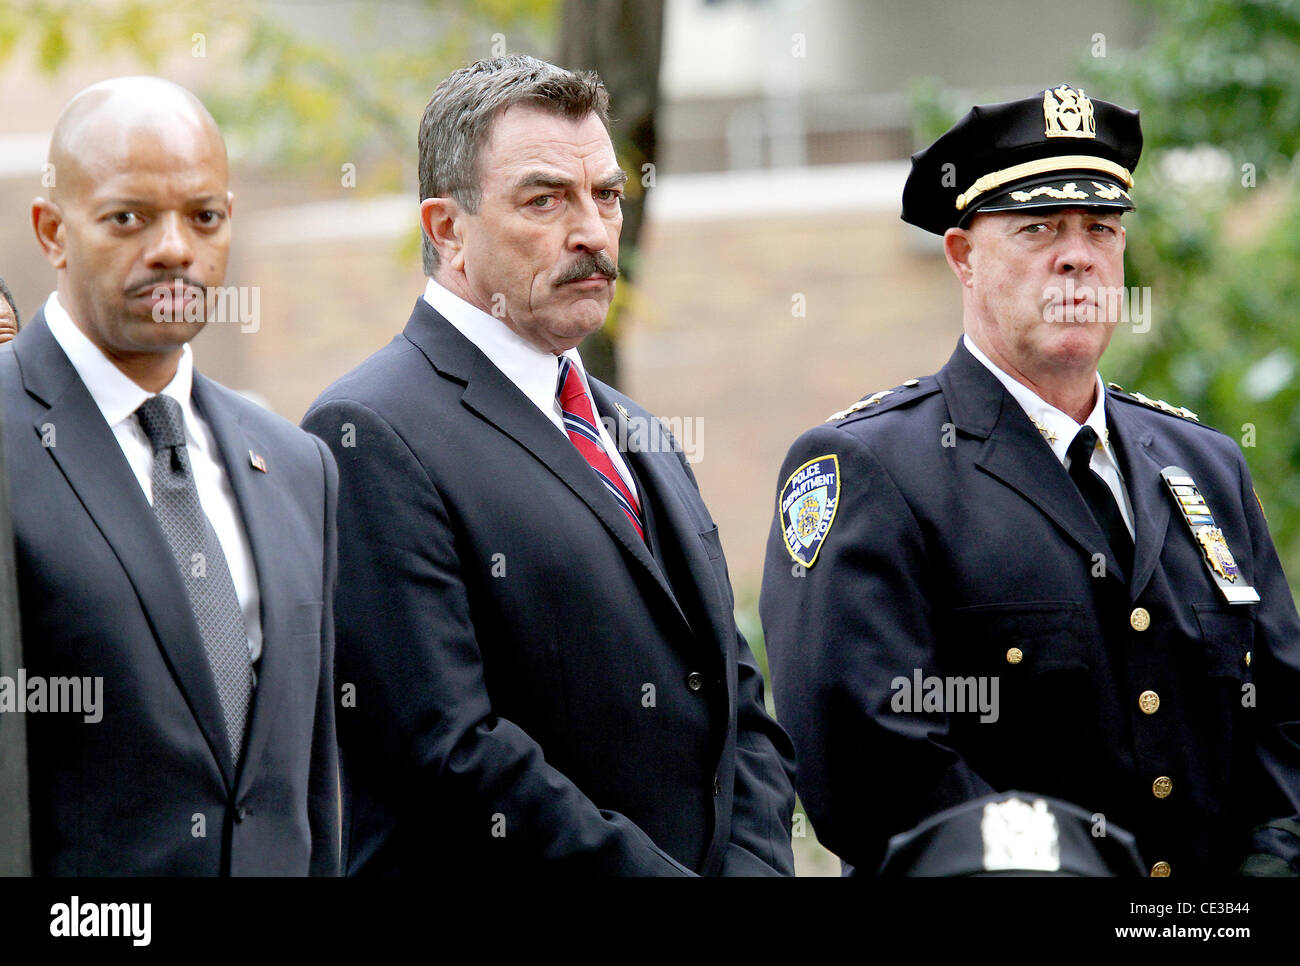 Tom Selleck Actors filming on the set of the television show 'Blue Bloods'  New York City, USA - 20.10.10 Stock Photo - Alamy